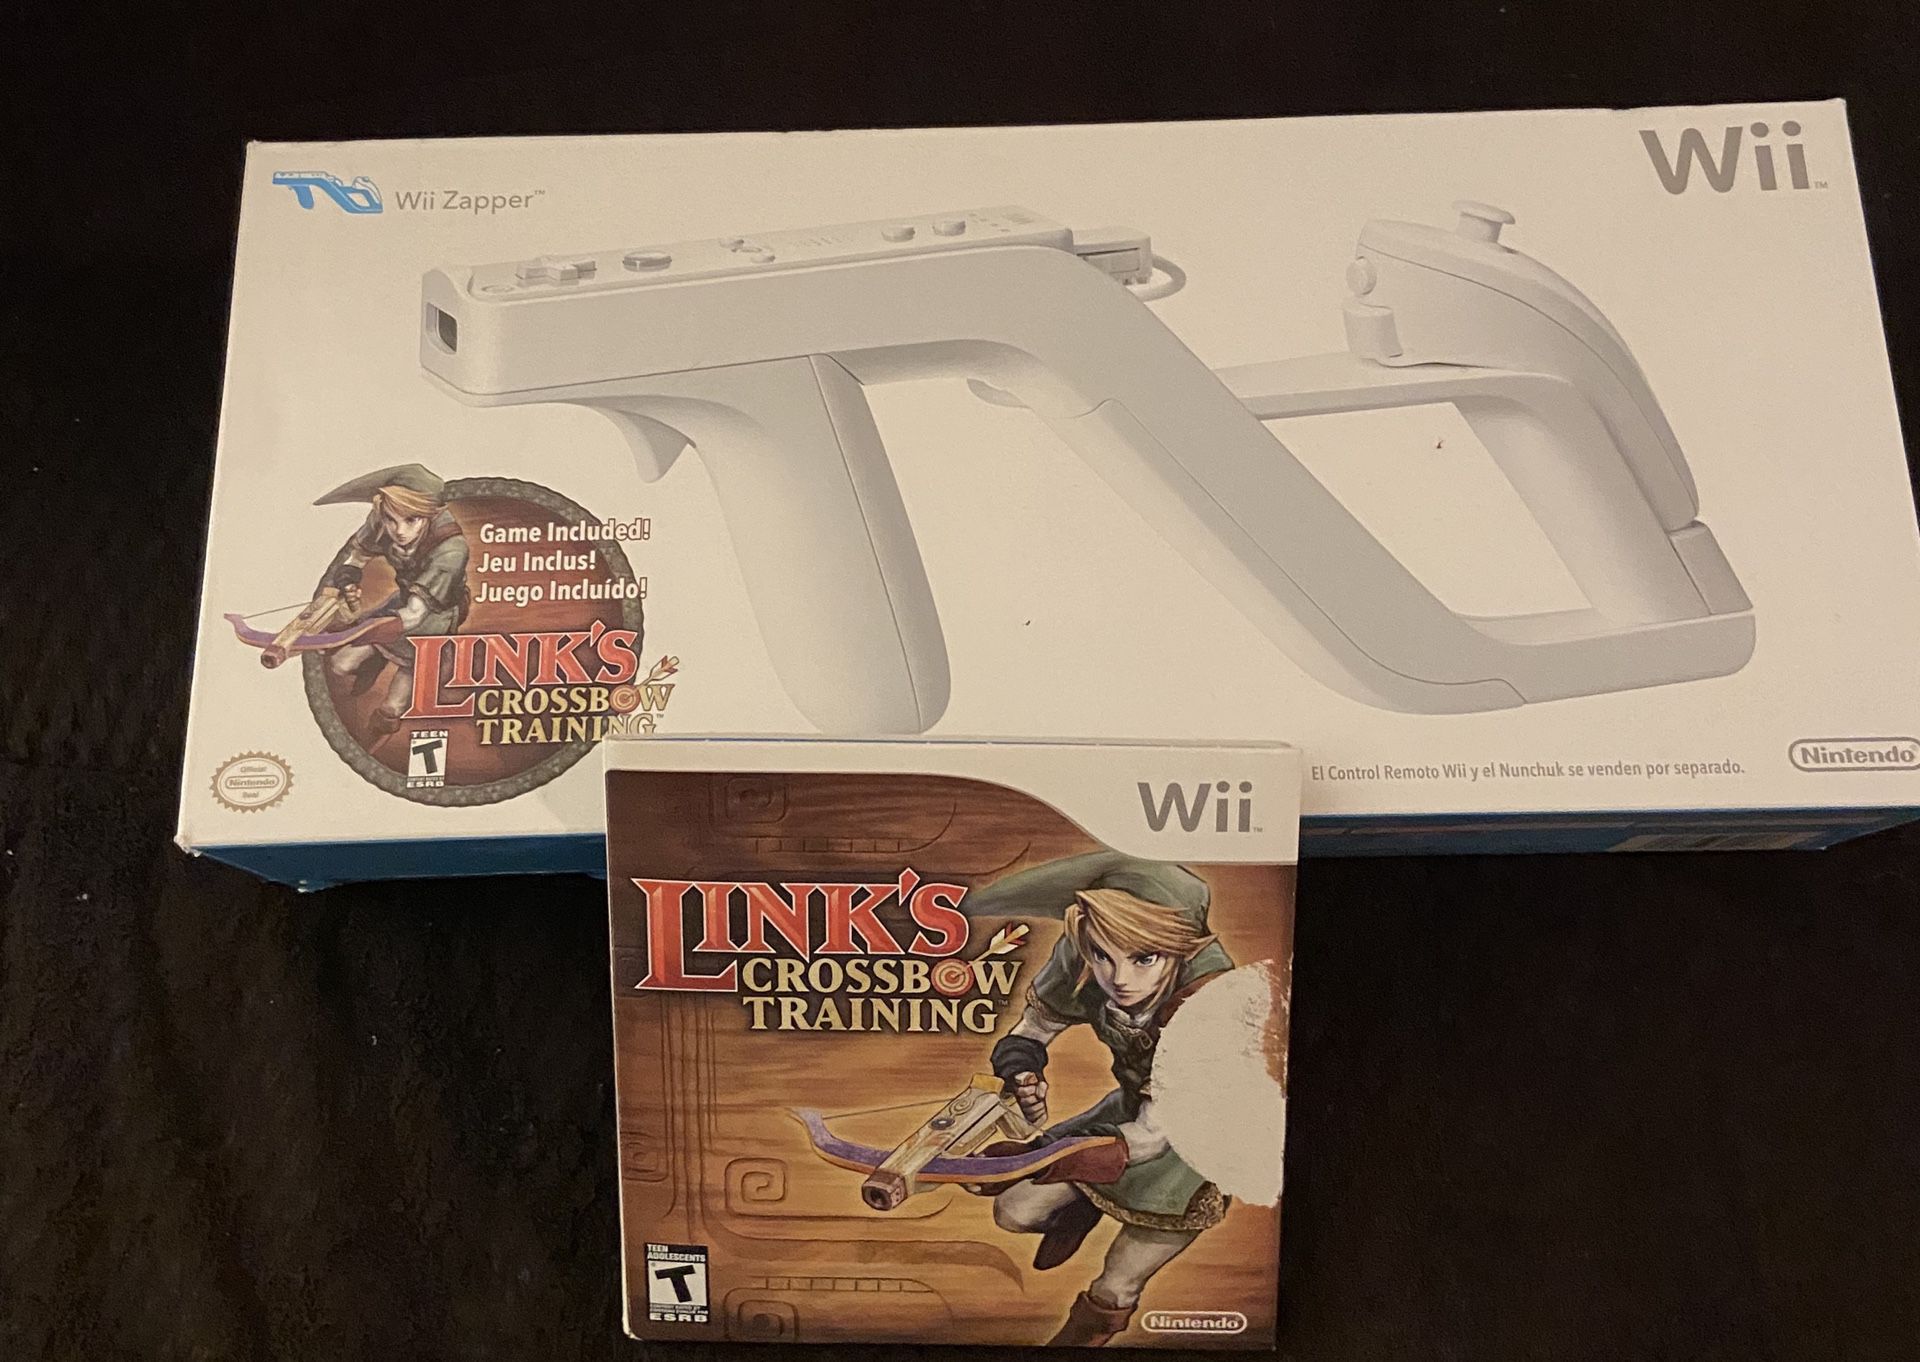 Wii Zapper and Links crossbow training game